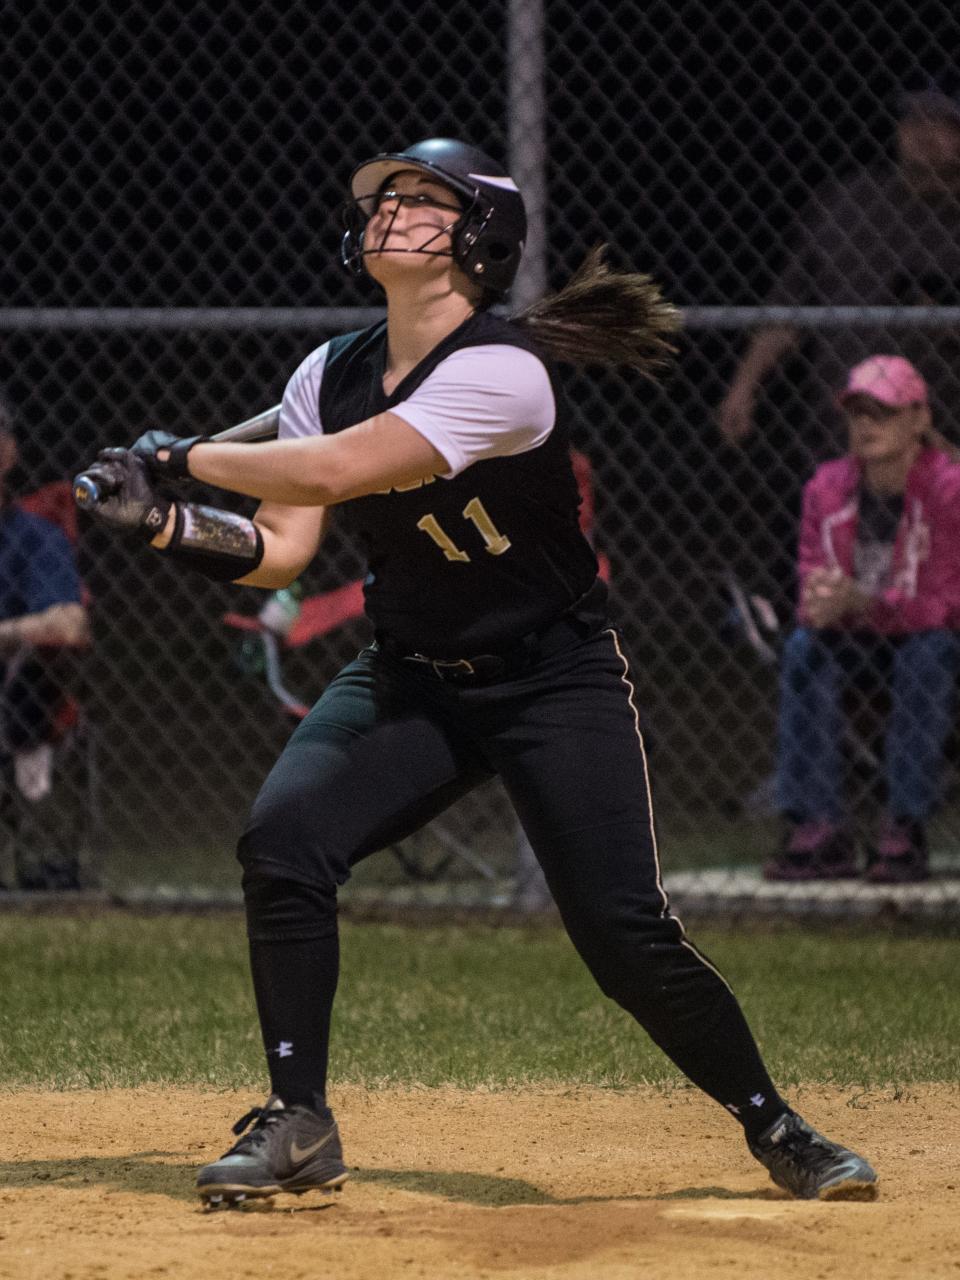 Gray's Creek's Sarah Watson hits a home run with bases loaded during the 4th inning against Lee County on Thursday, April 3, 2014 at Gray's Creek High School.